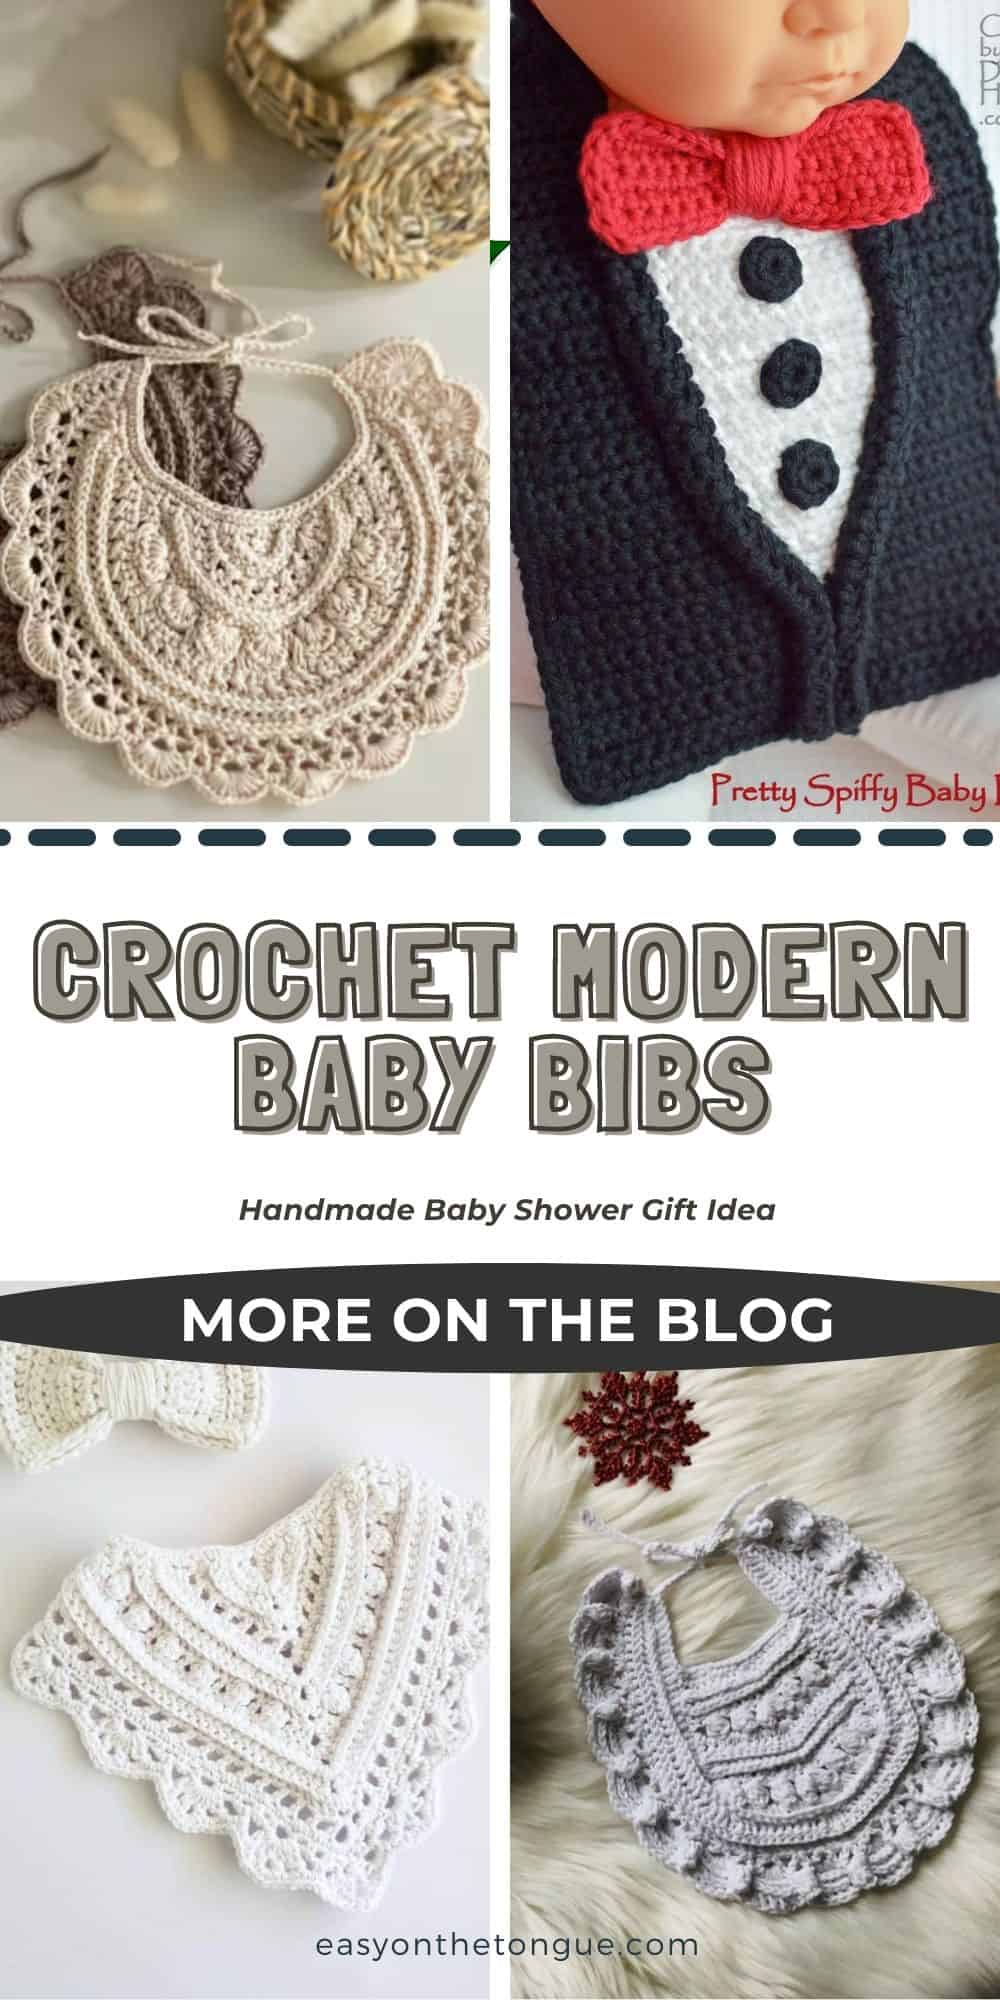 Modern Baby Bibs to crochet more patterns available on easyonthetongue.com  Modern Crochet Baby Bibs just for you!